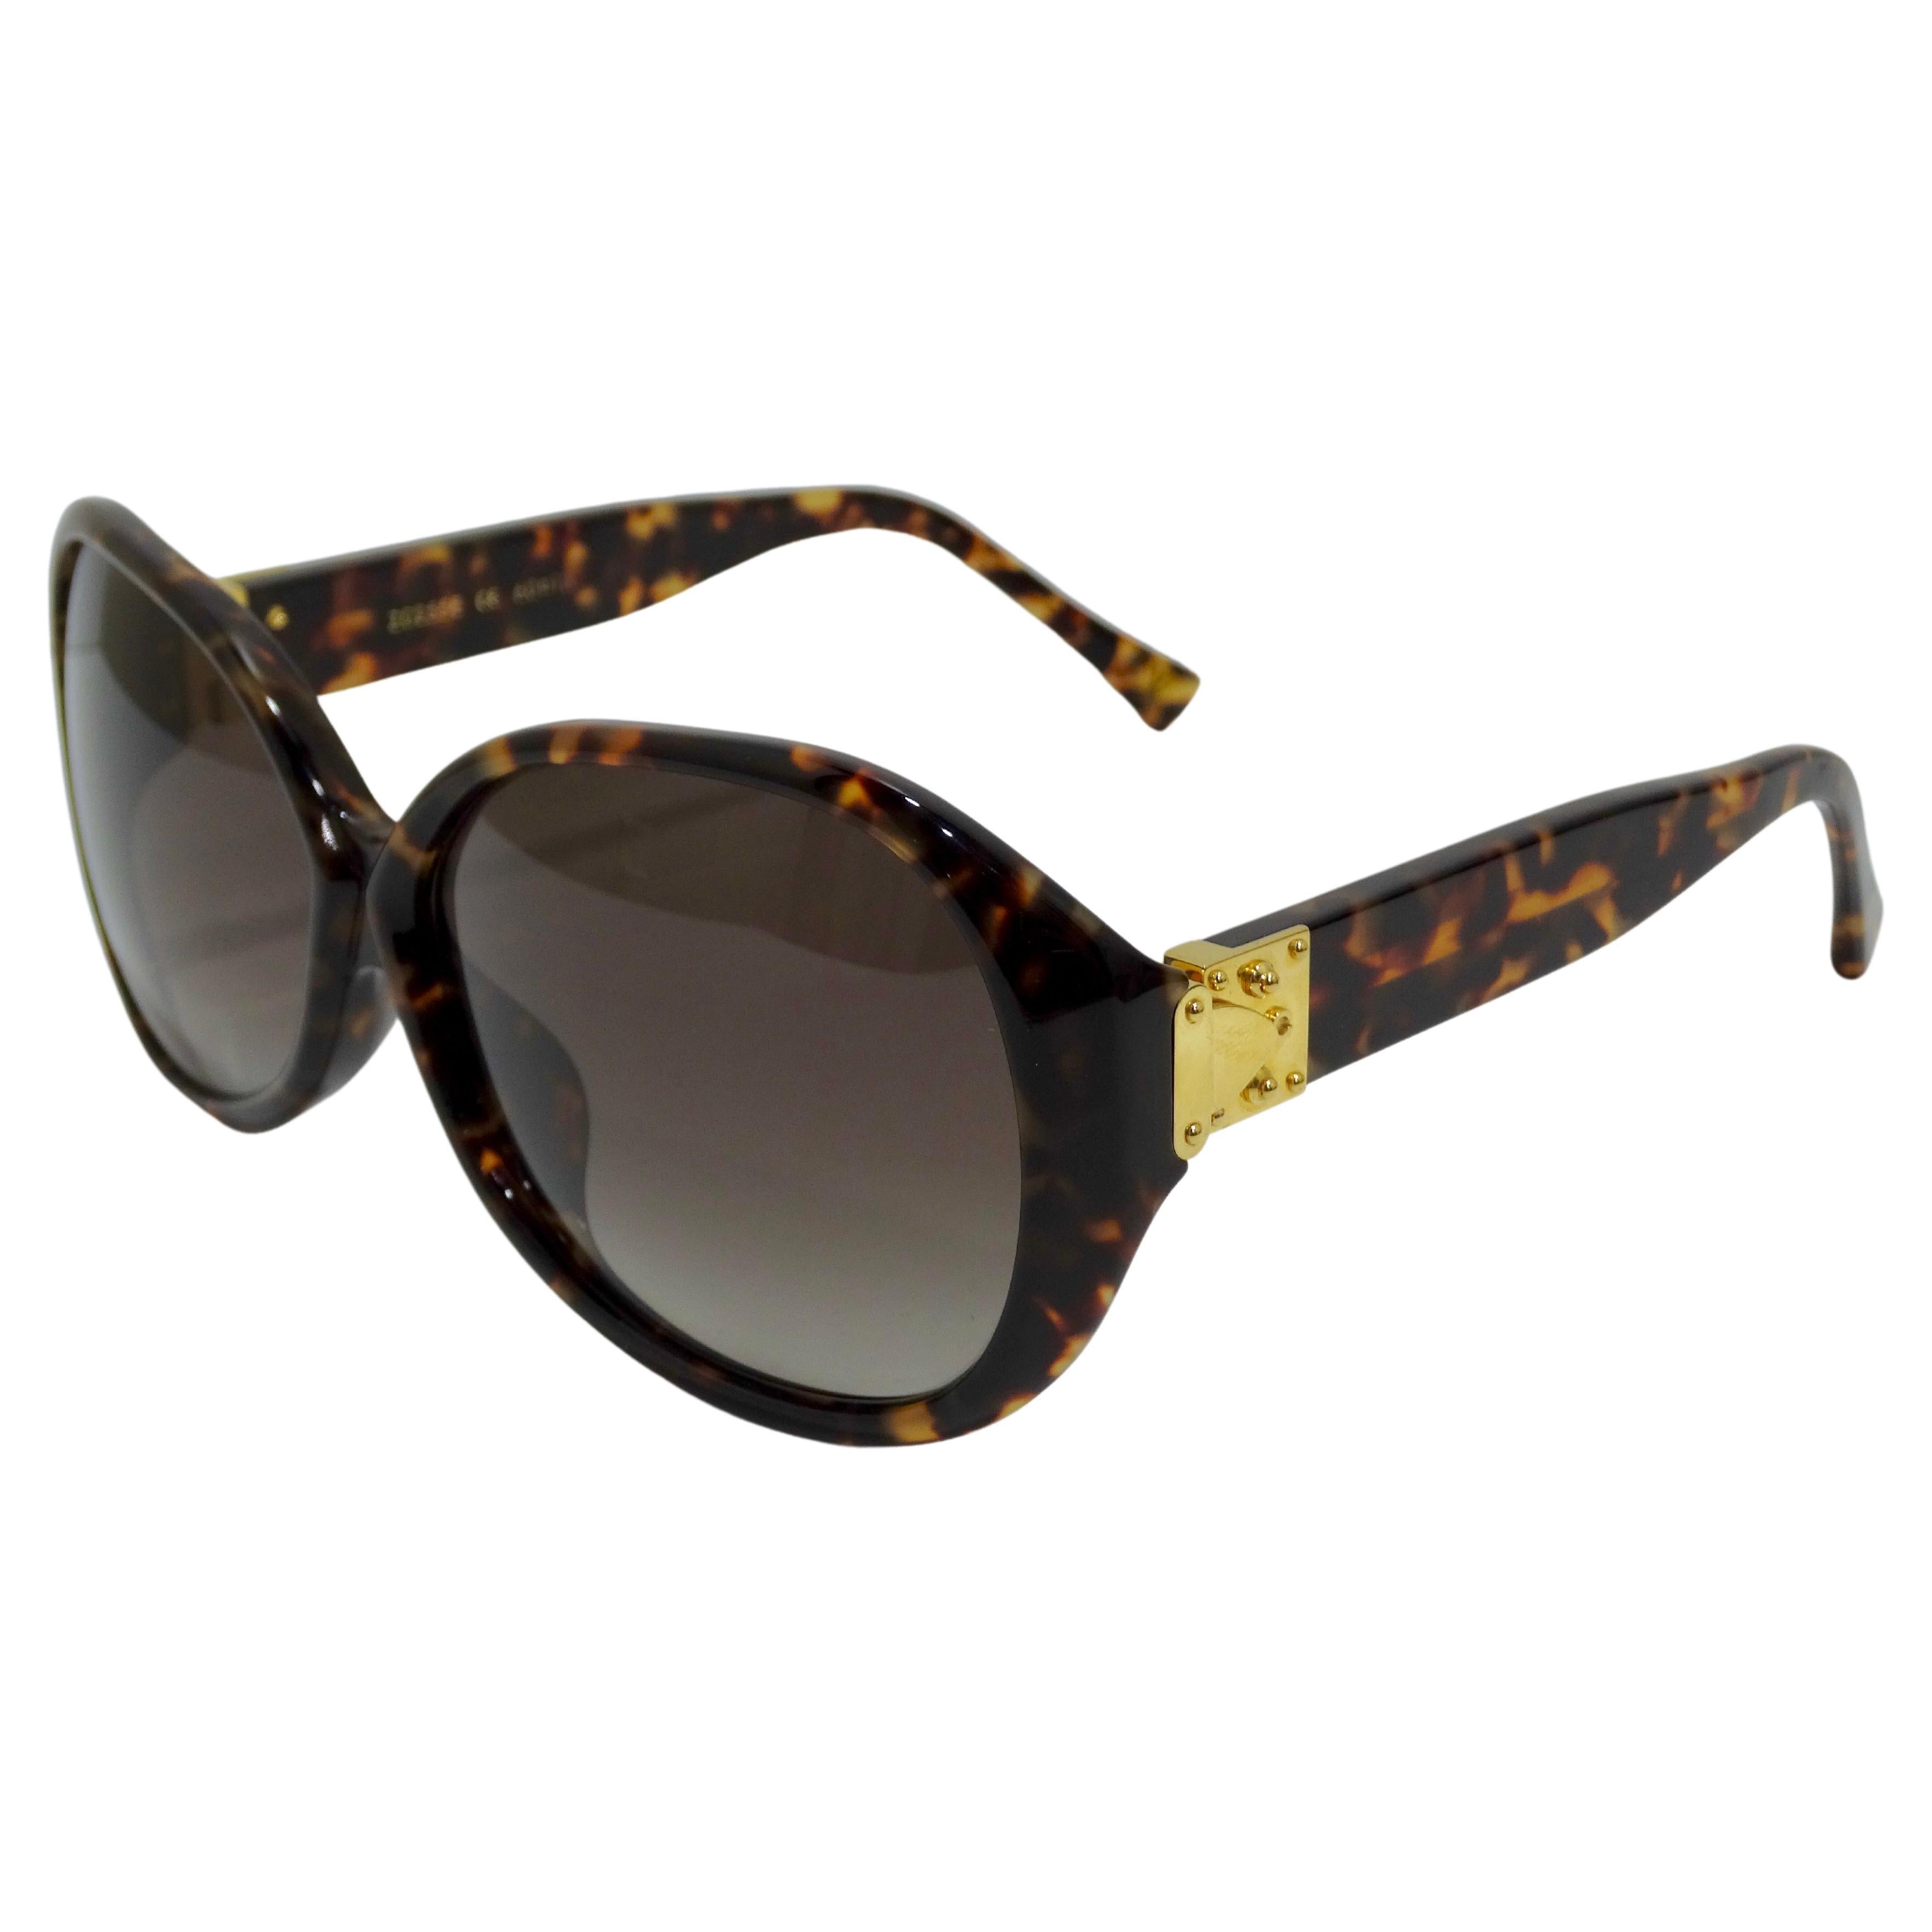 You can't go wrong with these Louis Vuitton chic and edgy Soupcon GM sunglasses! Trust me, these will be so easy to style! These are crafted in a tortoise shell rounded frame that features the iconic S-lock hinge inspired by their luggages along the